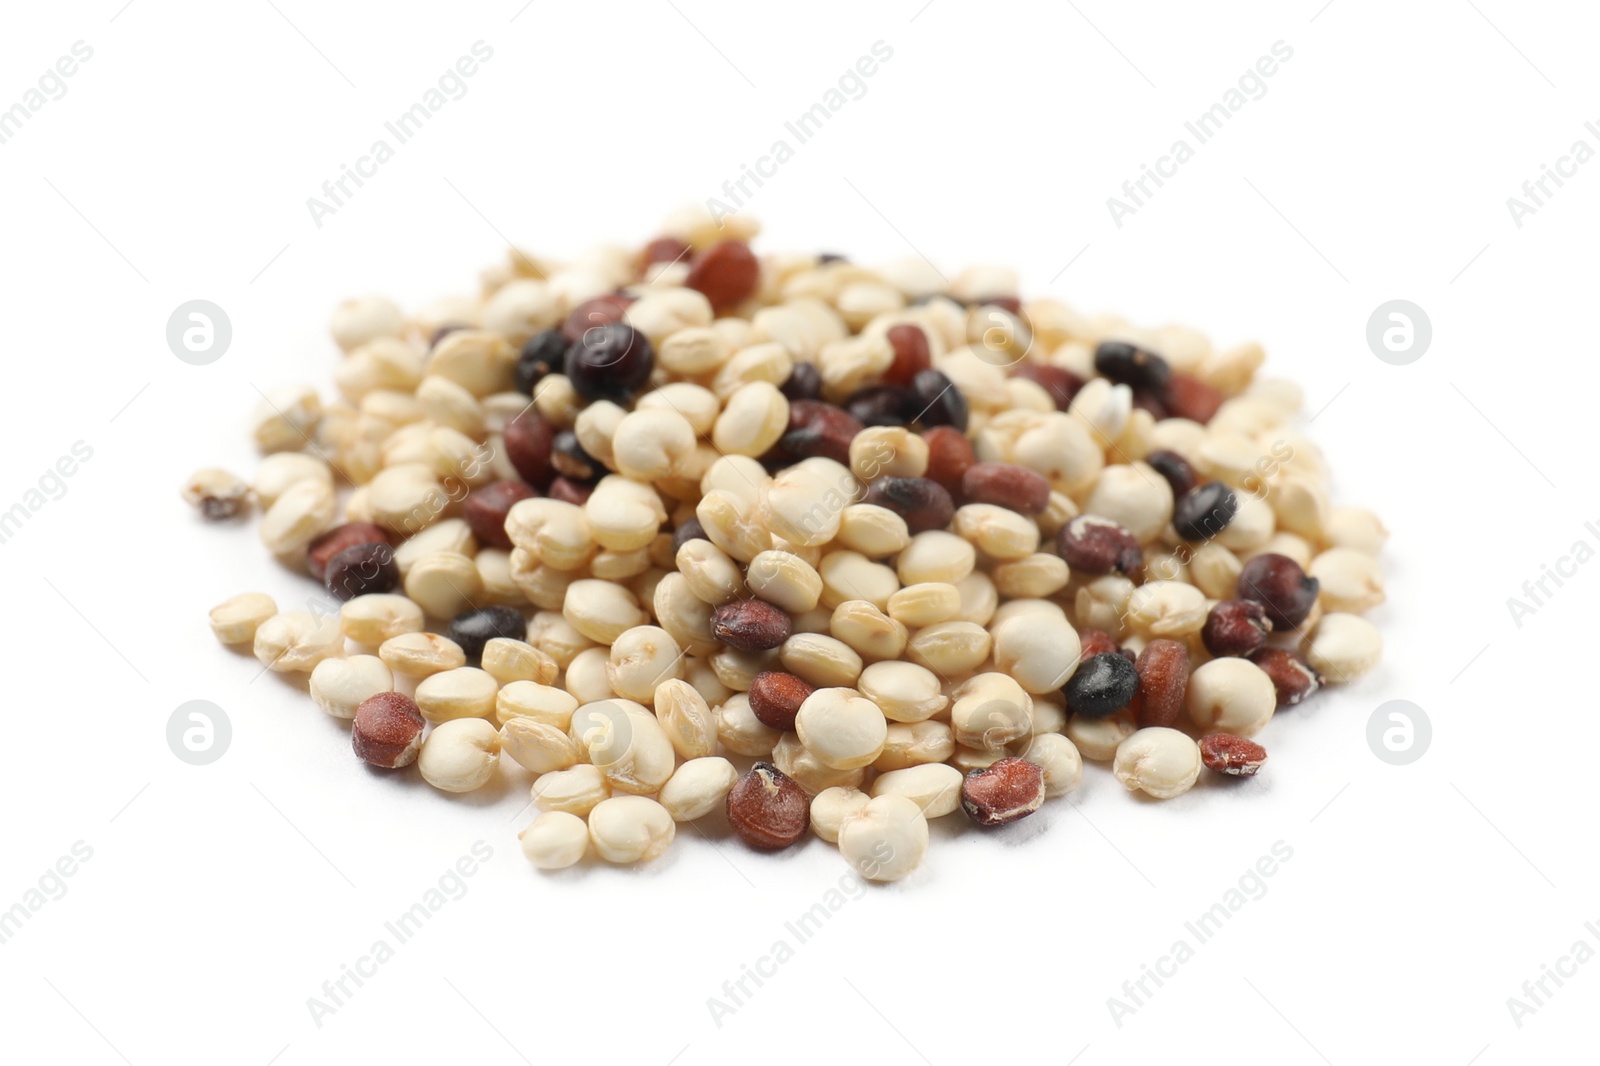 Photo of Pile of raw quinoa seeds isolated on white